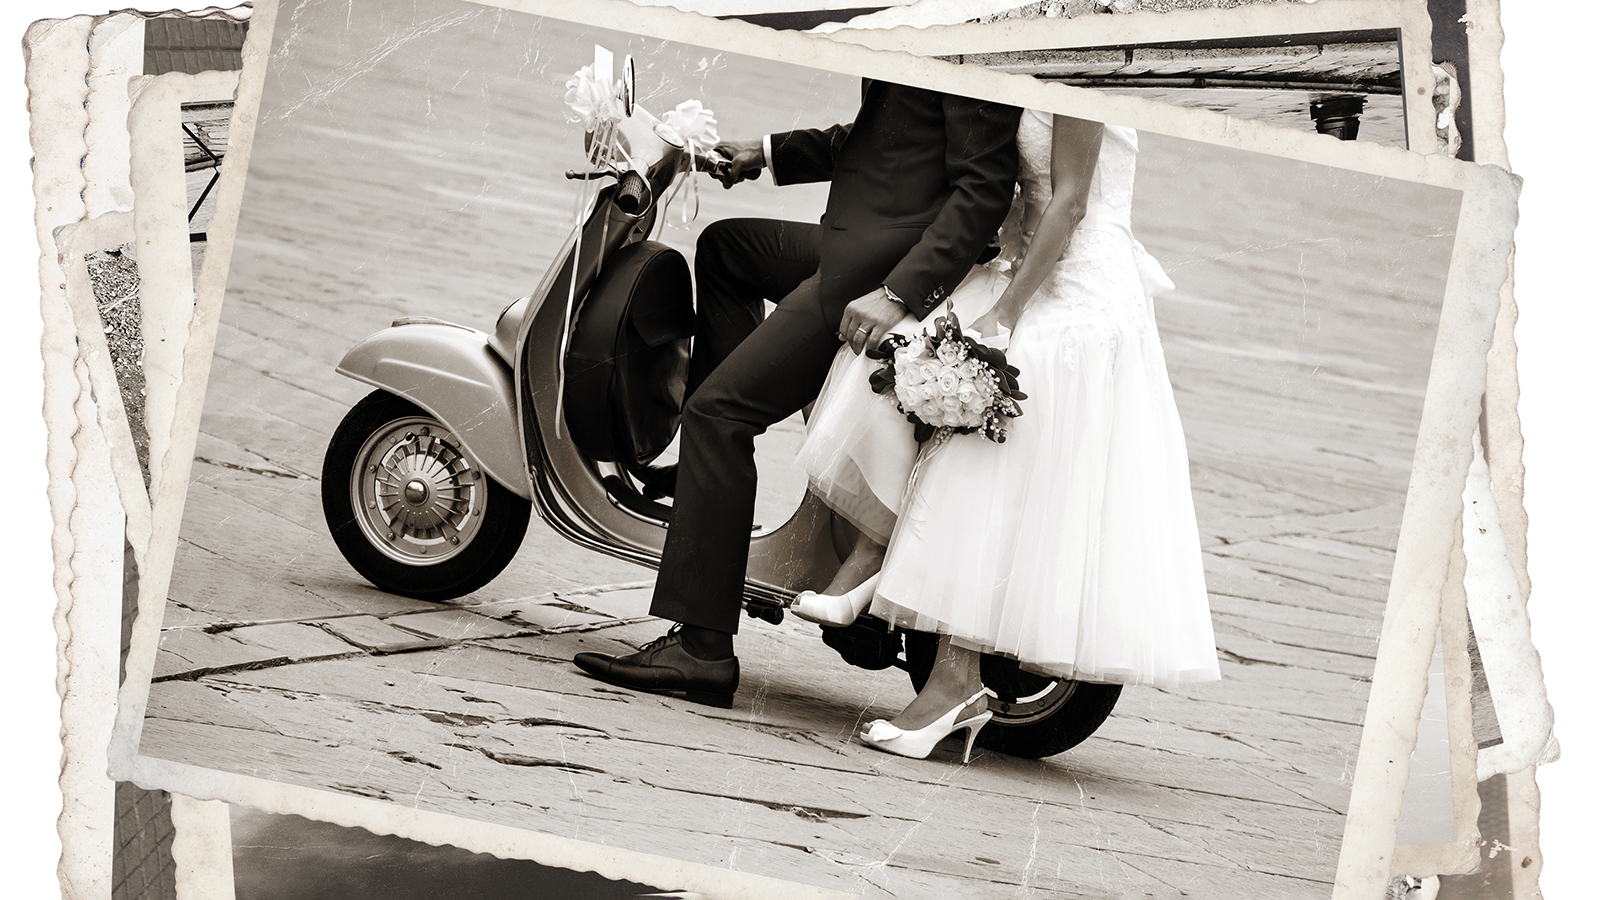 Black and white photos, Vintage photos with Young newlywed just married, posing on an old gray scooter